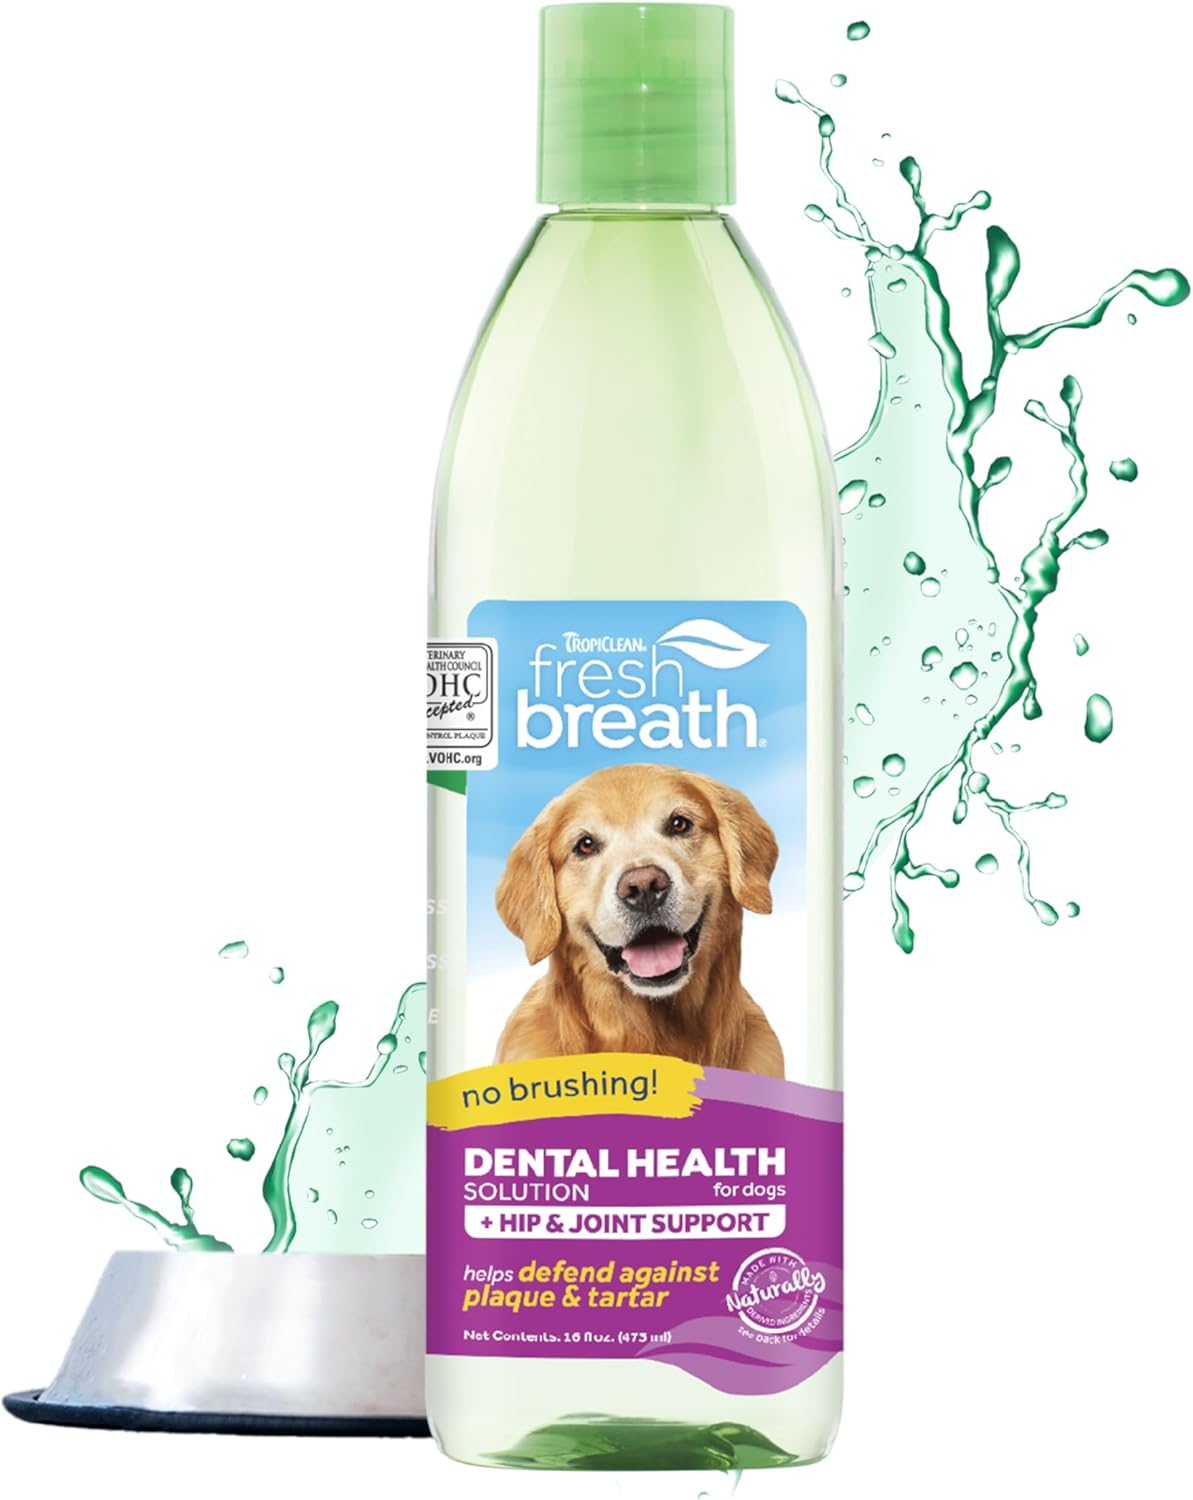 TropiClean Fresh Breath Dog Teeth Cleaning – Dog Dental Care for Bad Breath - Breath Freshener - Water Additive Mouthwash – Helps Remove Plaque Off Dogs Teeth, Hip & Joint Support, 473ml?FBHJWA16Z